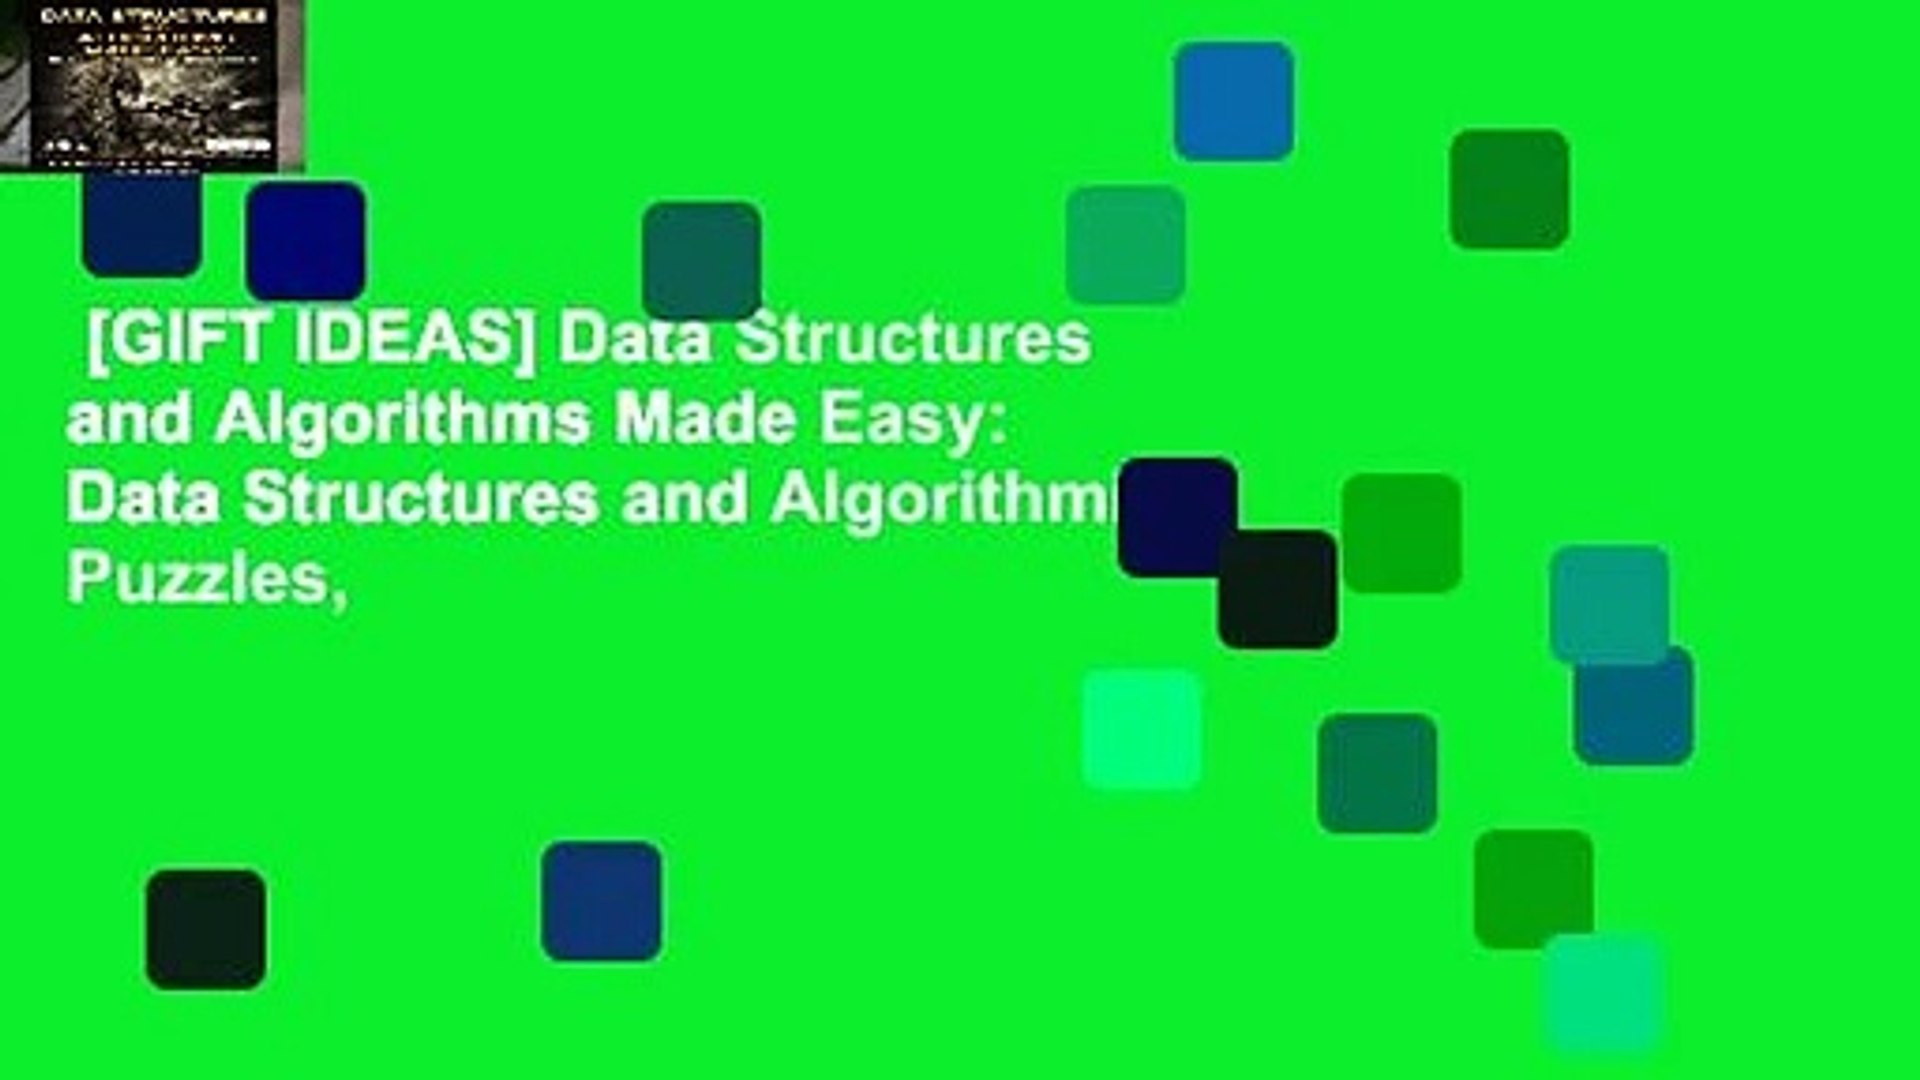 [GIFT IDEAS] Data Structures and Algorithms Made Easy: Data Structures and Algorithmic Puzzles,